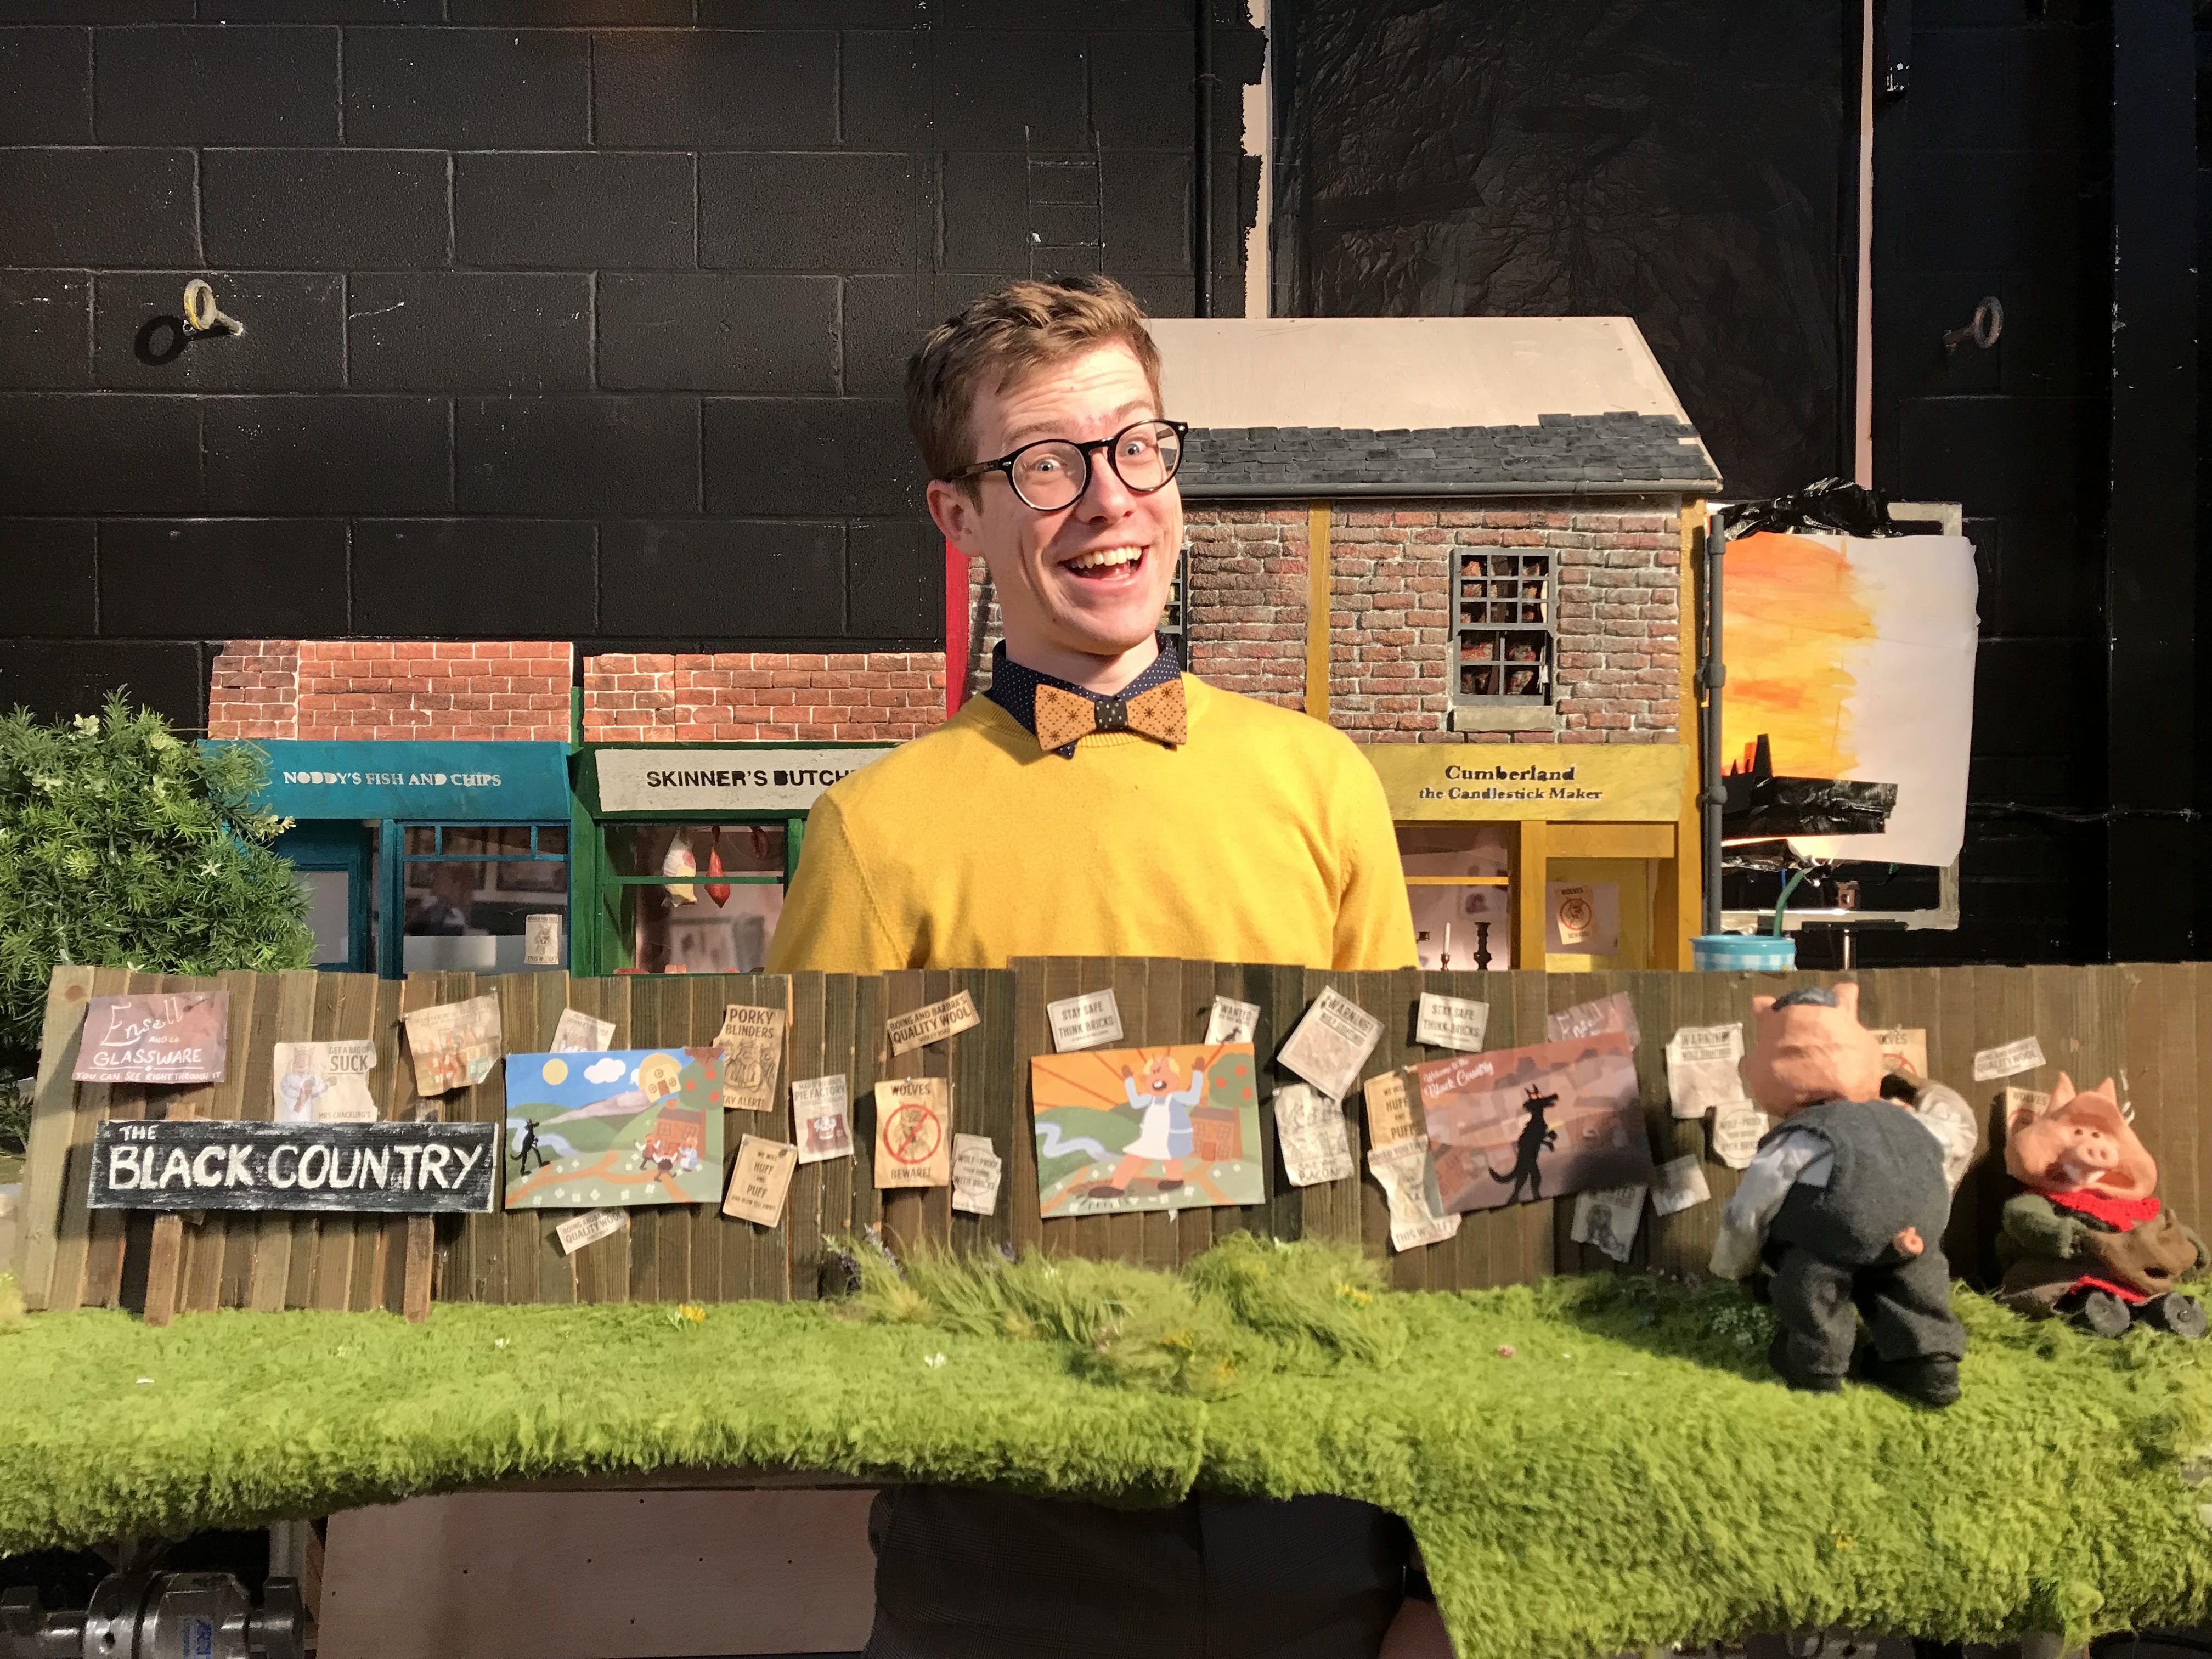 Walsall animator releases Black Country-inspired film made at Oscar-winning Aardman Animations